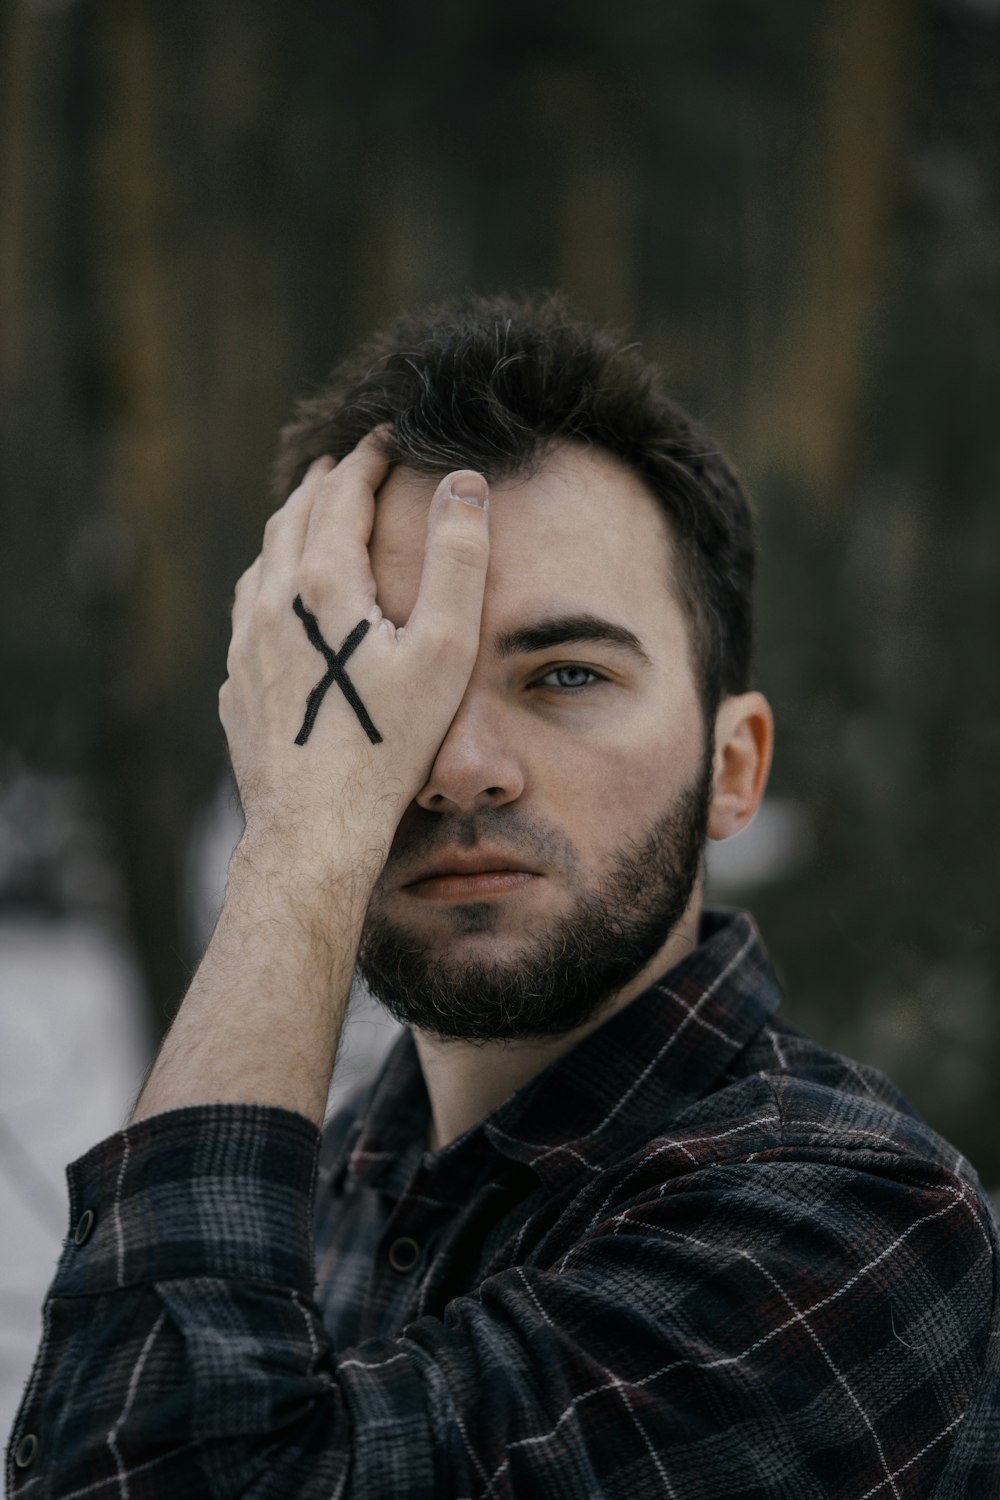 a man with a cross tattoo on his forehead